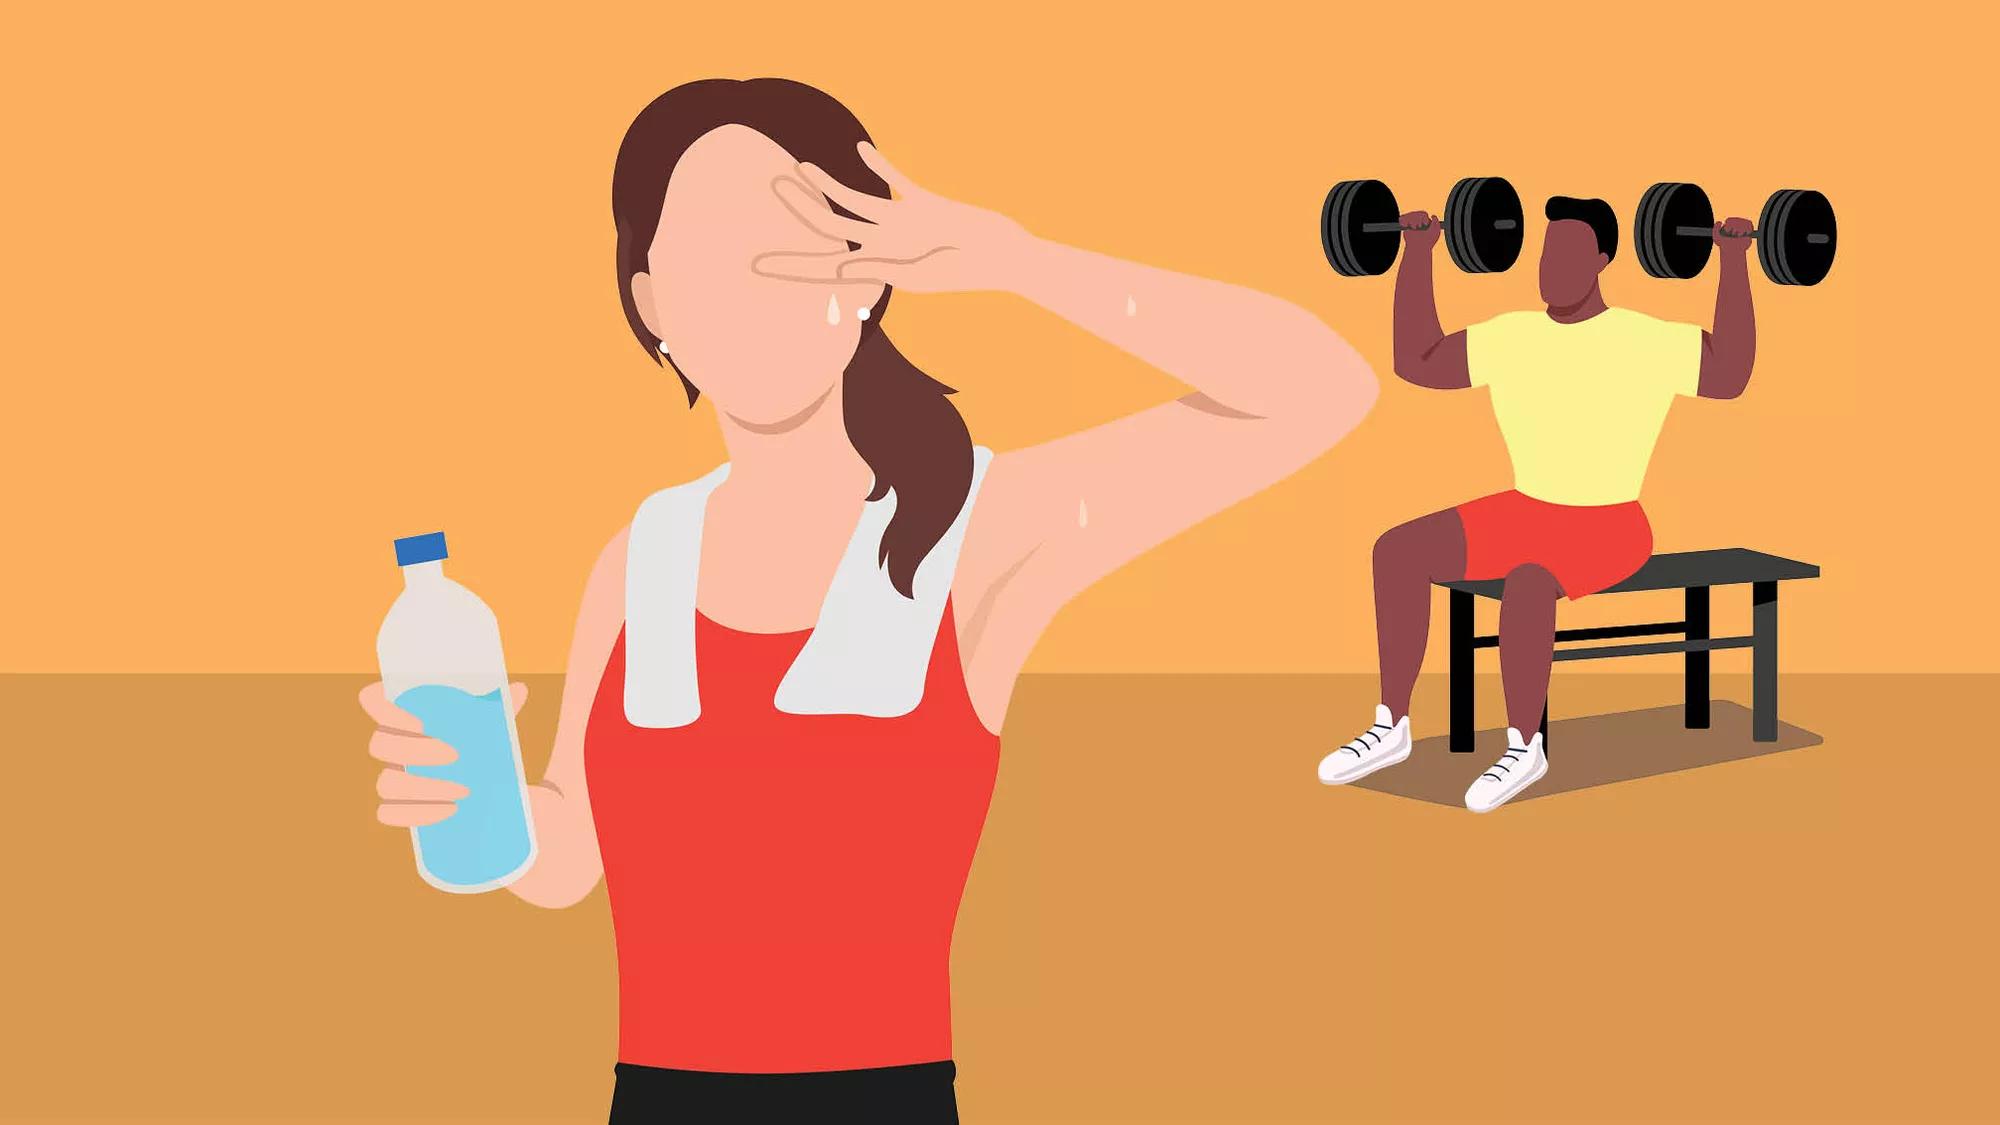 Gym Anxiety: What Causes It and How to Deal